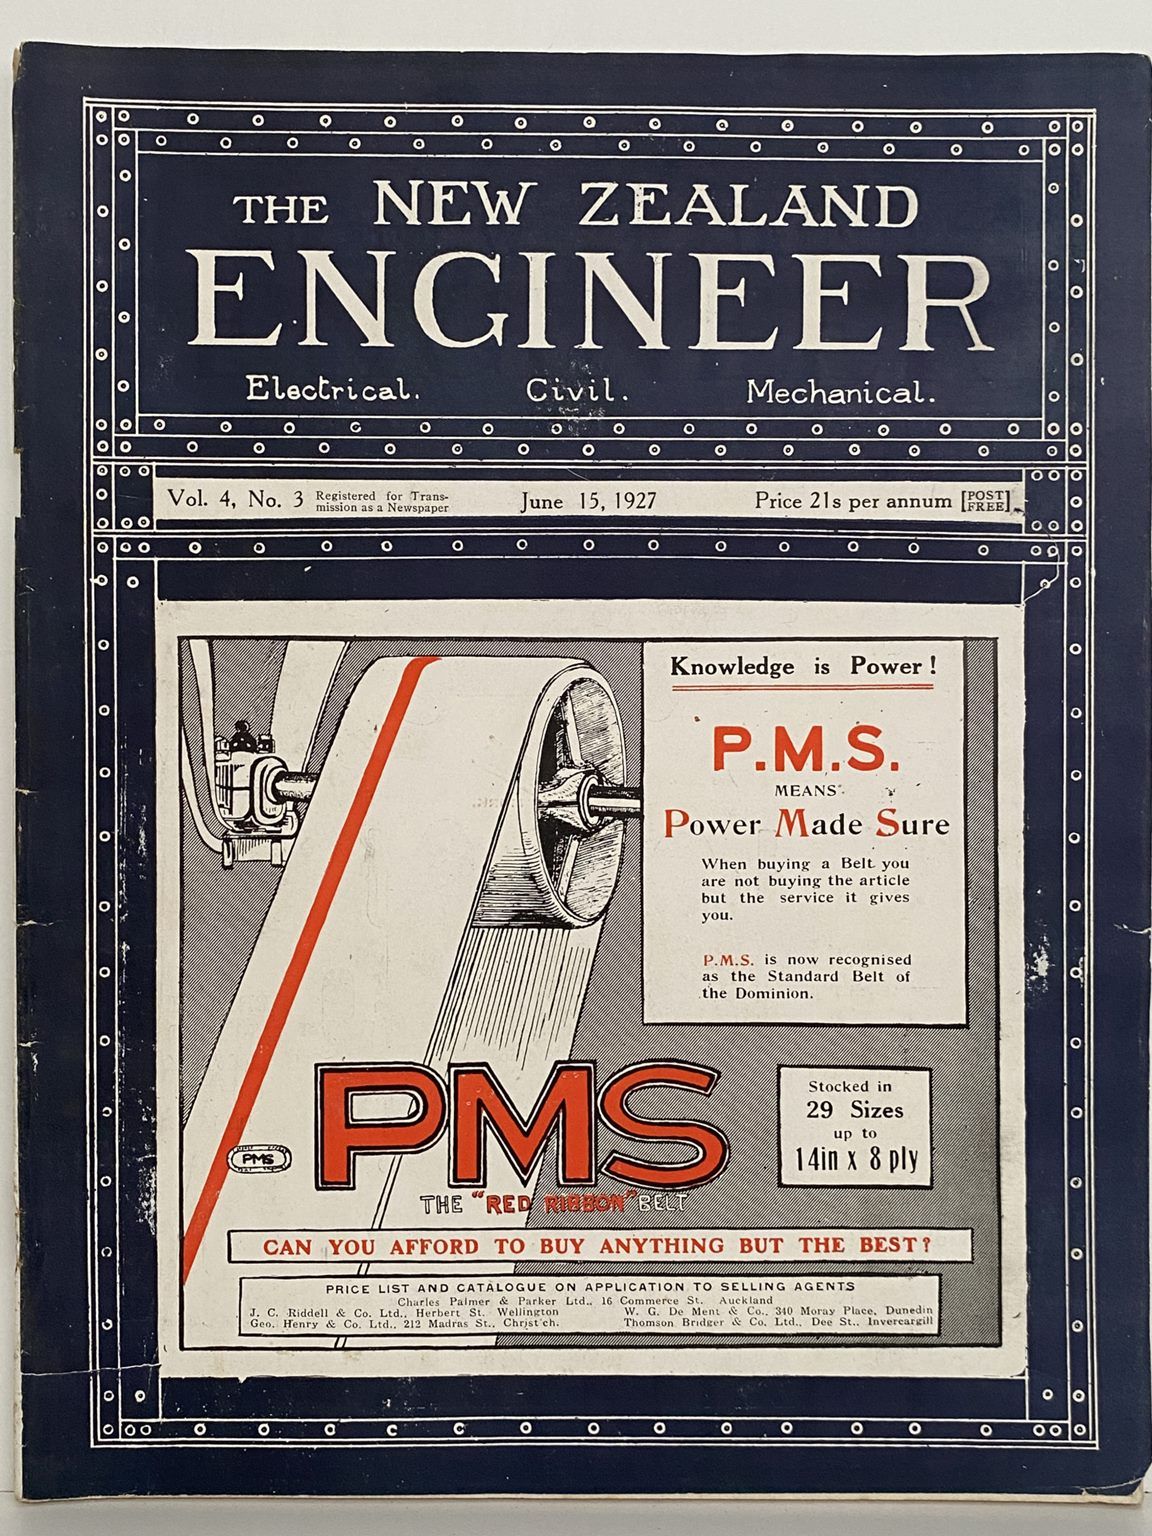 OLD MAGAZINE: The New Zealand Engineer Vol. 4, No. 3 - 15 June 1927